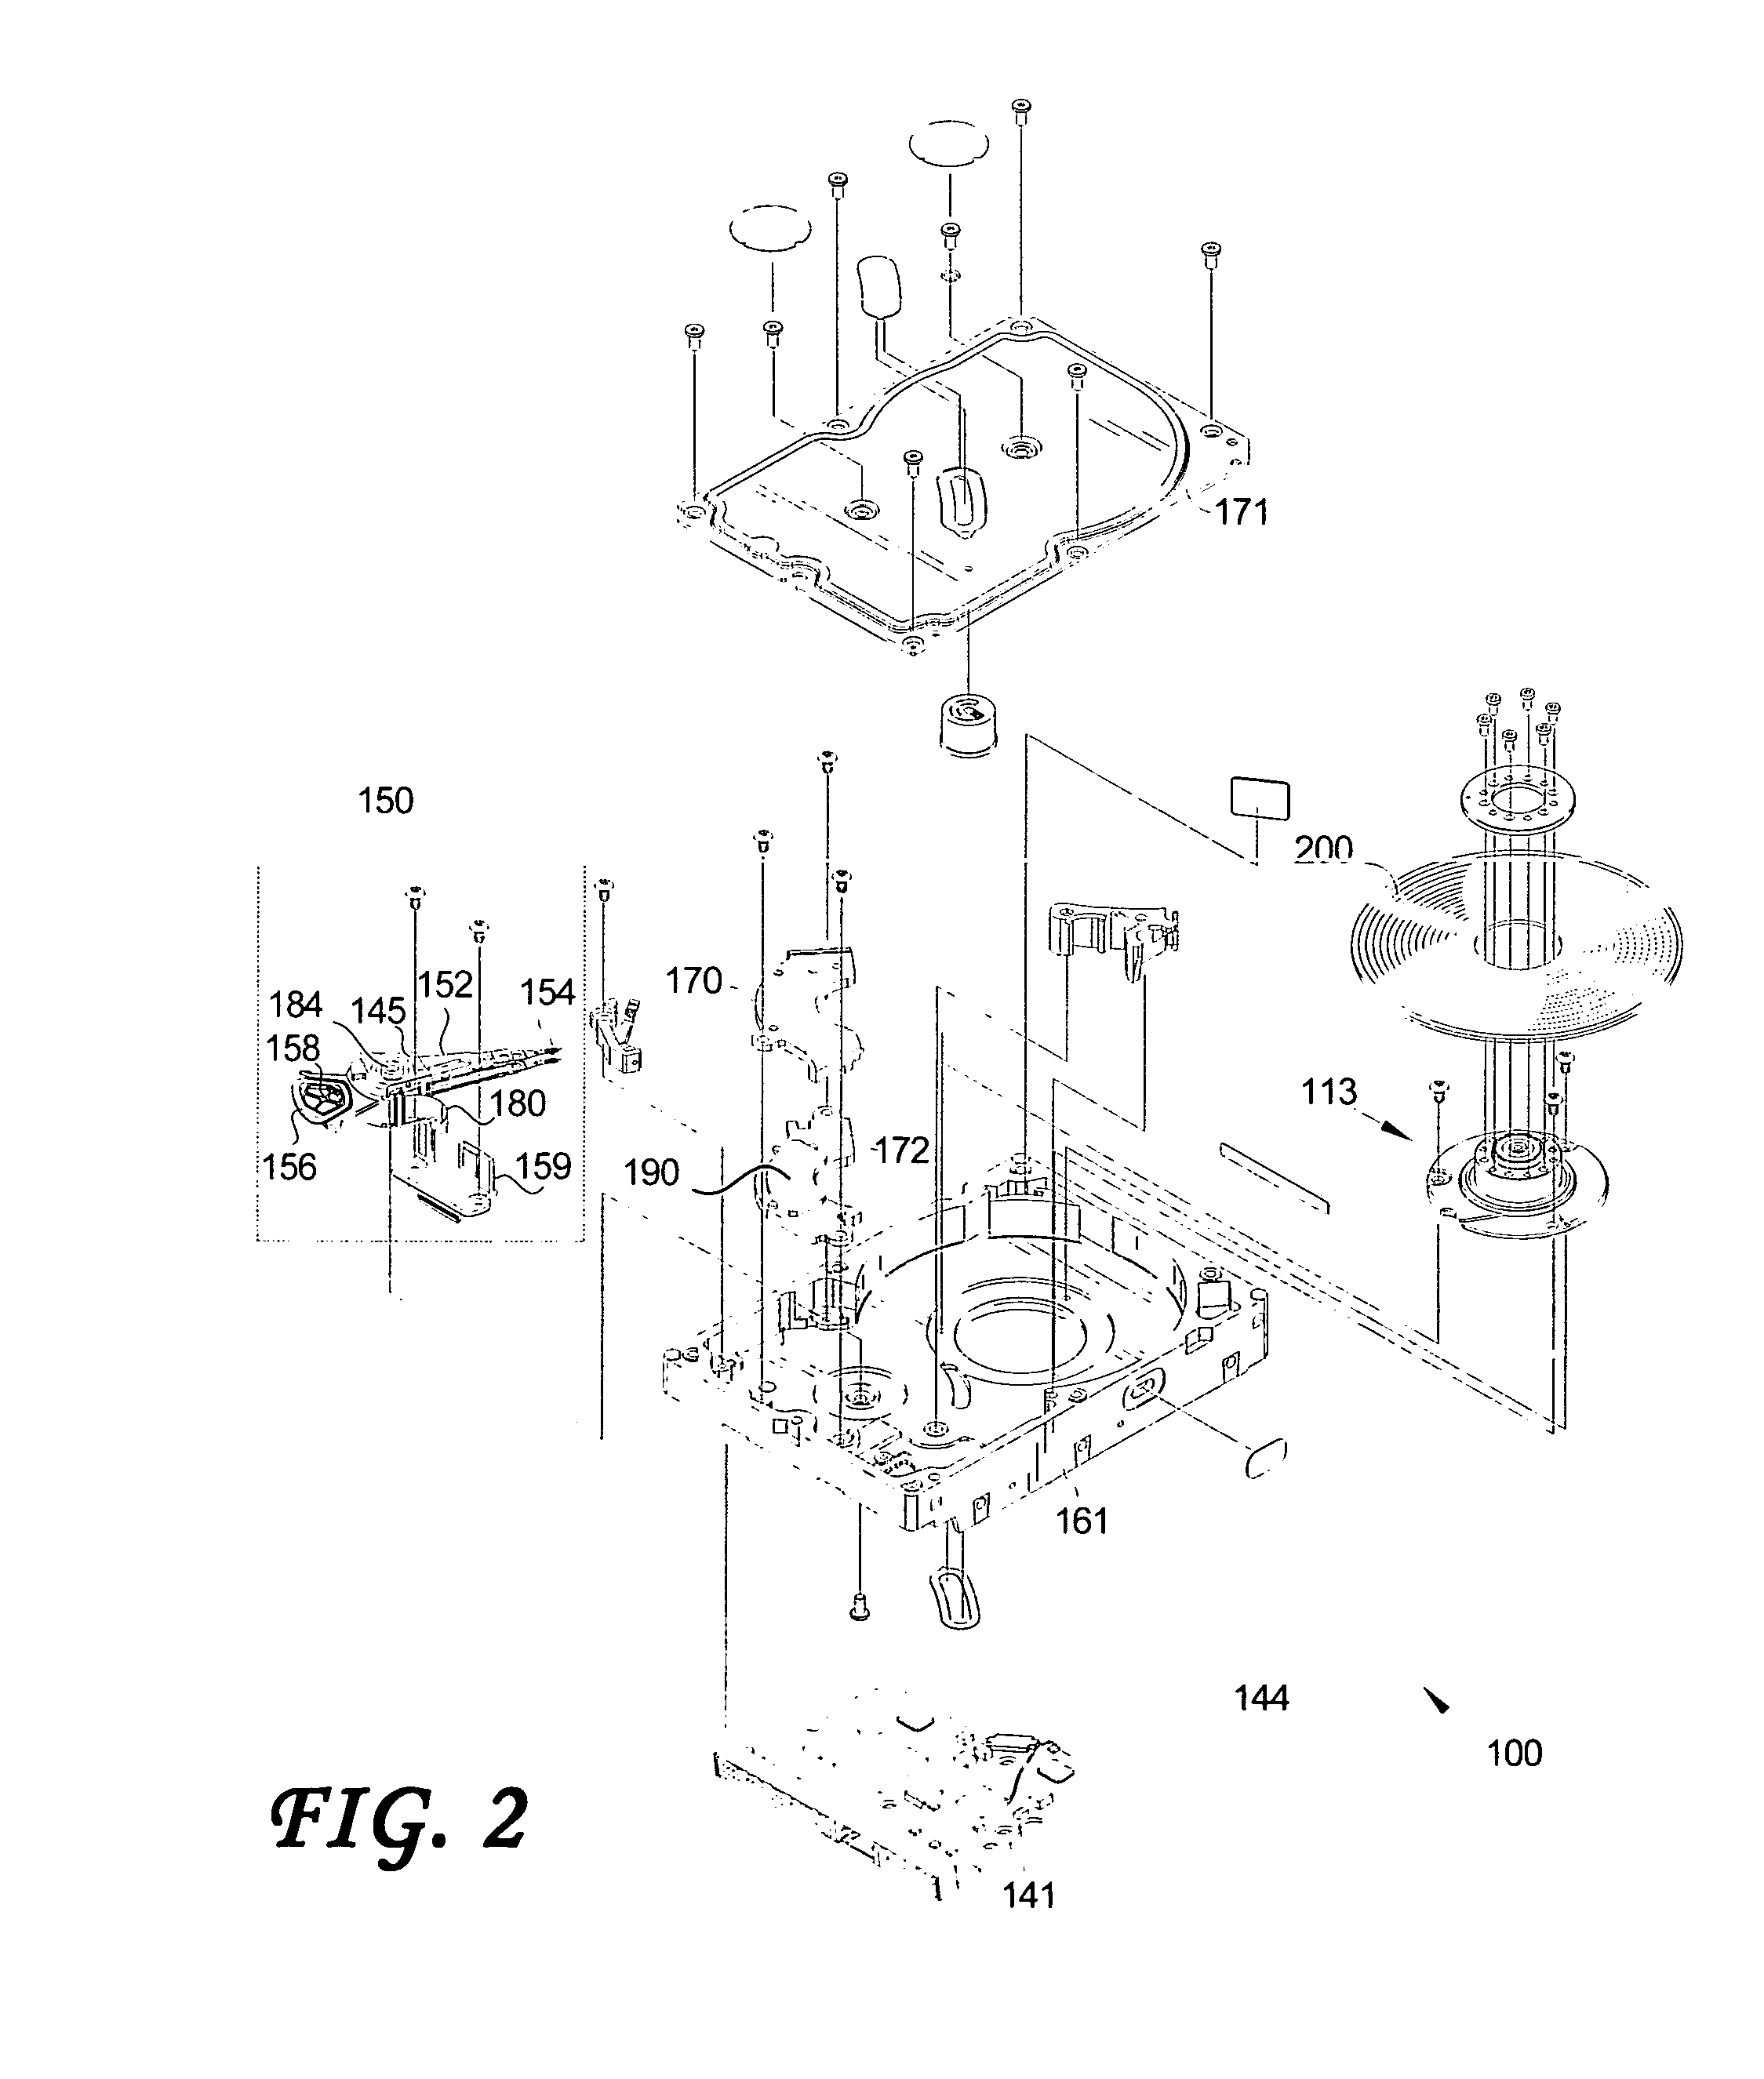 Disk drives and disk drive containing devices that include a servo frequency generator and spindle control timer that compensate for disk eccentricity